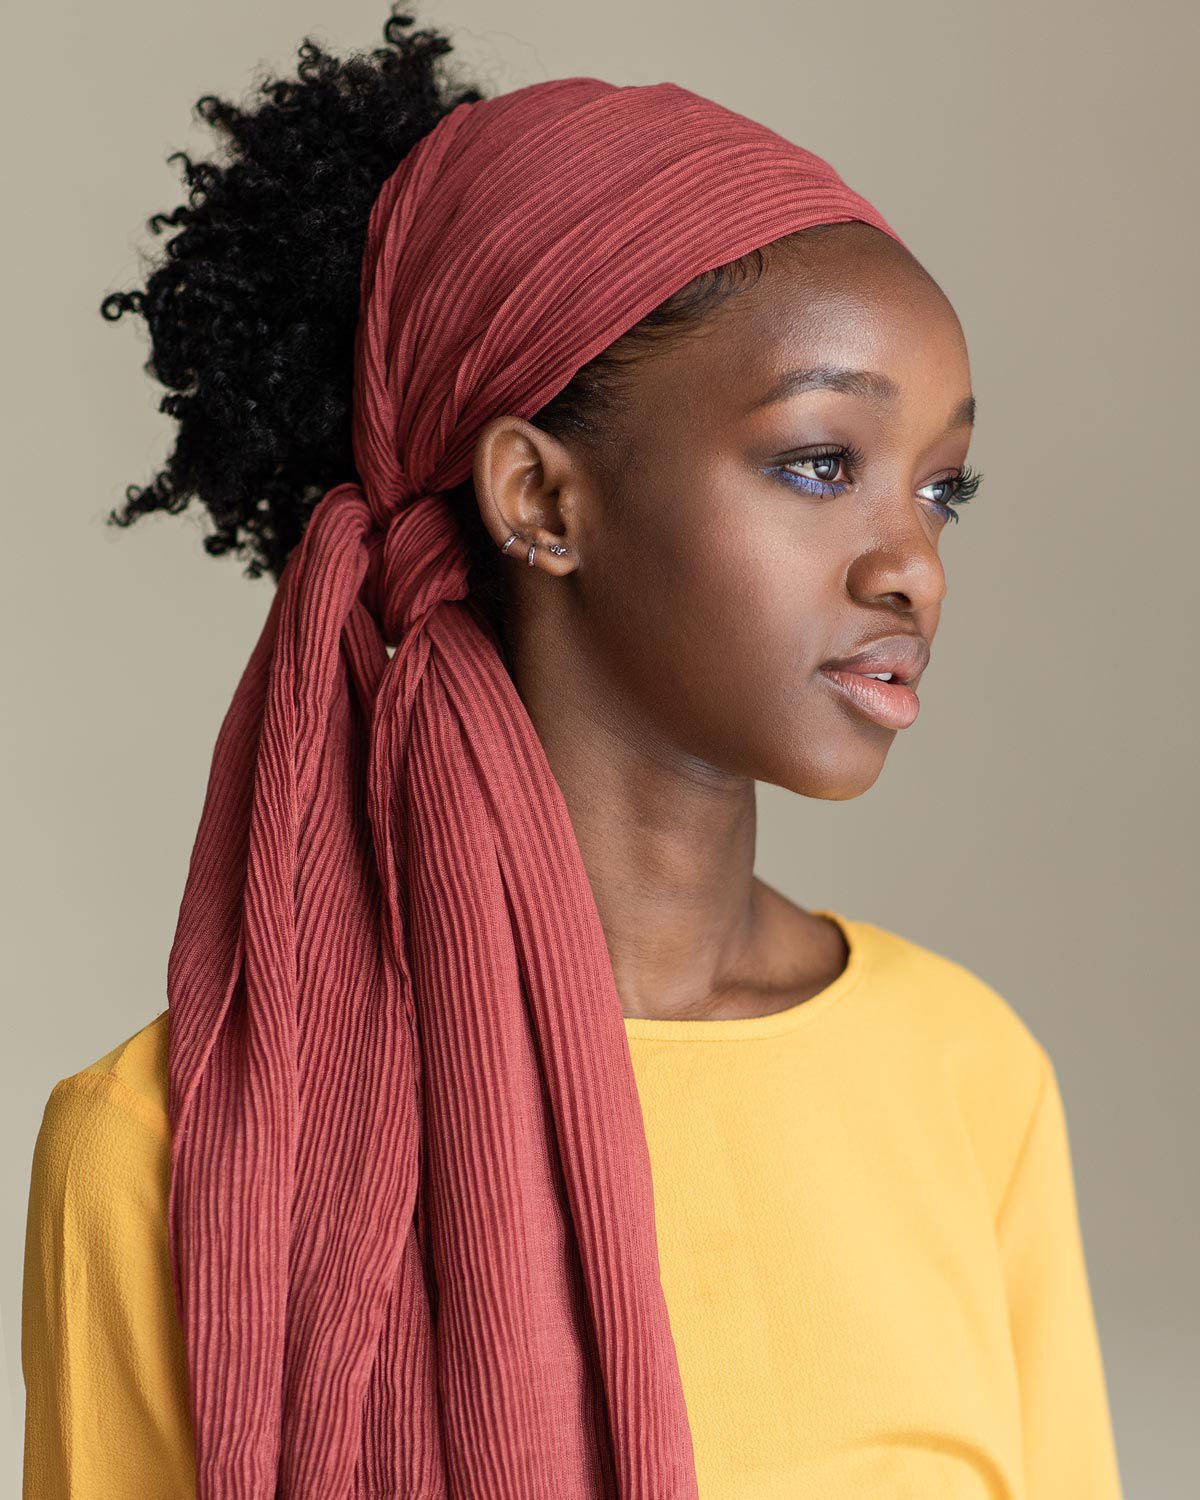 How To Tie A Head Wrap With Braids References Hotelritchey - Riset